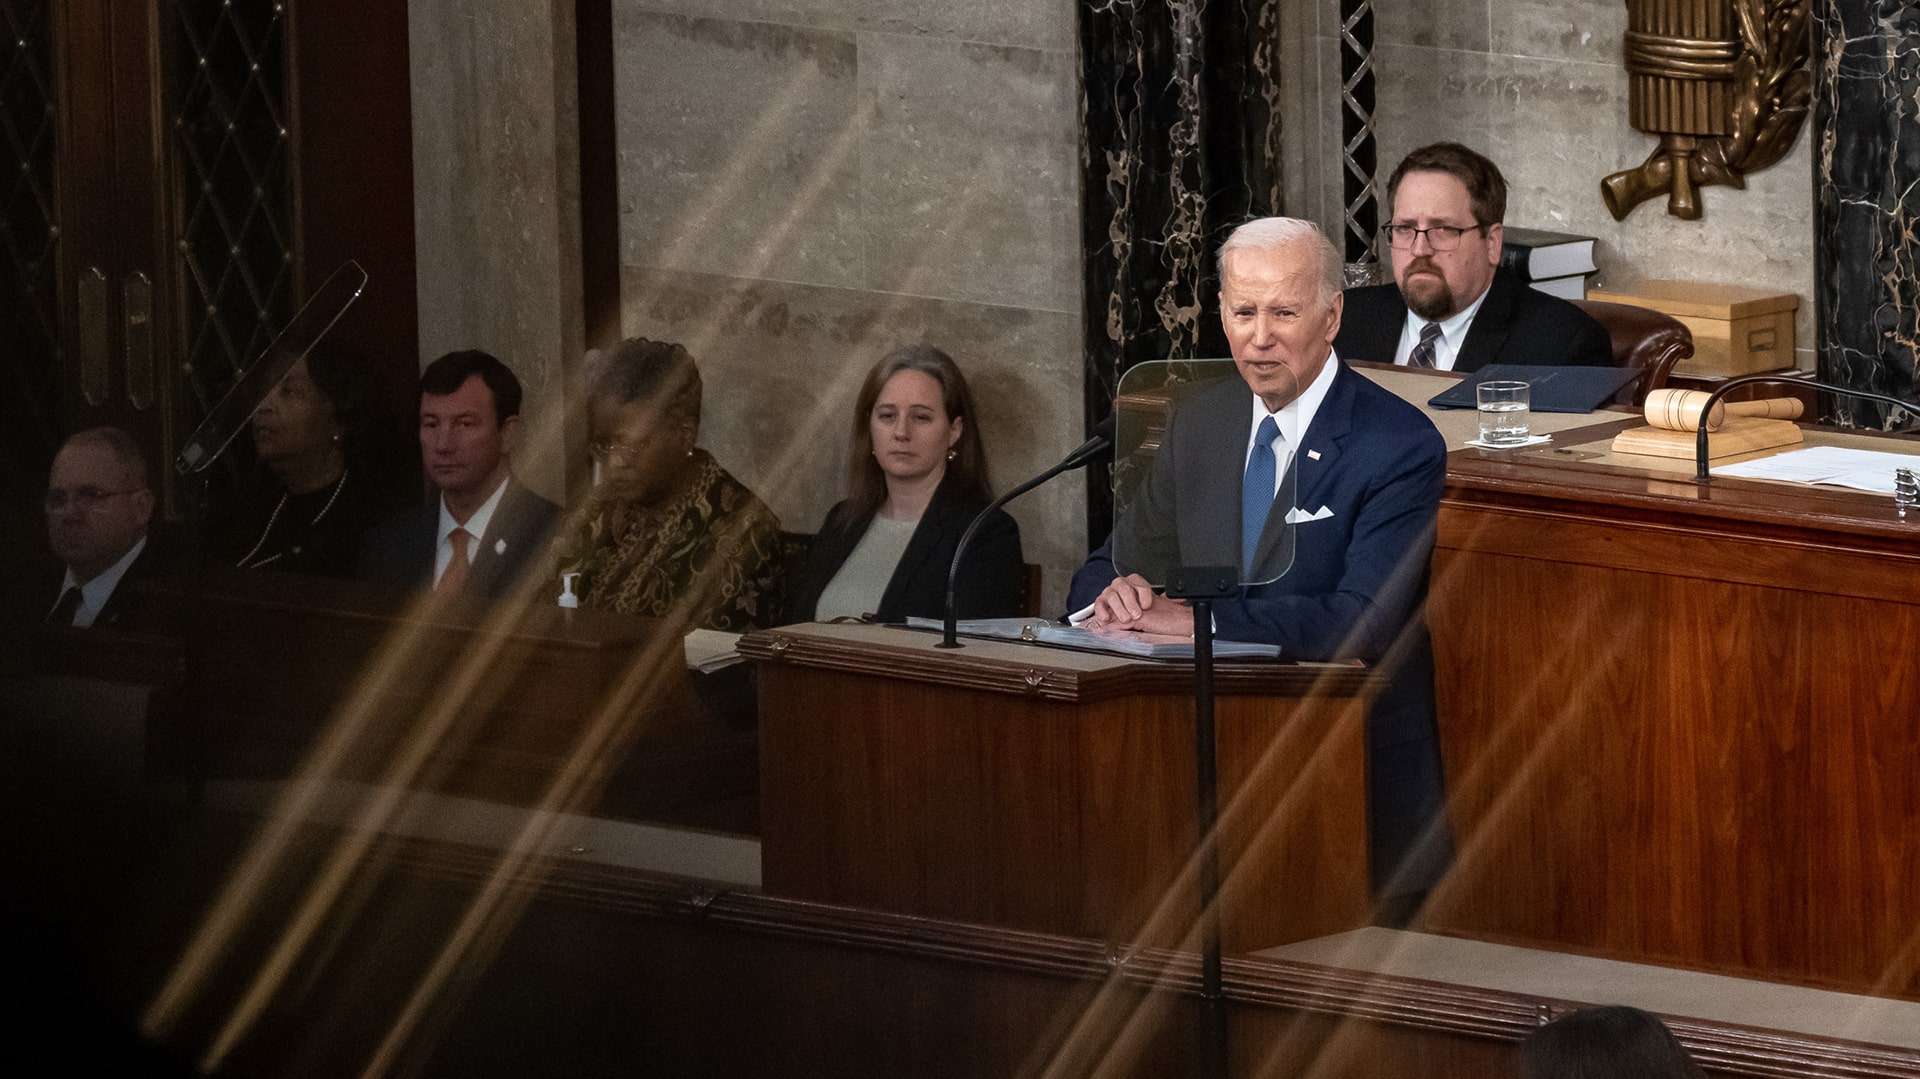 Joe Biden delivers his State of the Union address, Tuesday, February 7, 2023, on the House floor of the U.S. Capitol in Washington, D.C. (Official White House Photo by Carlos Fyfe)